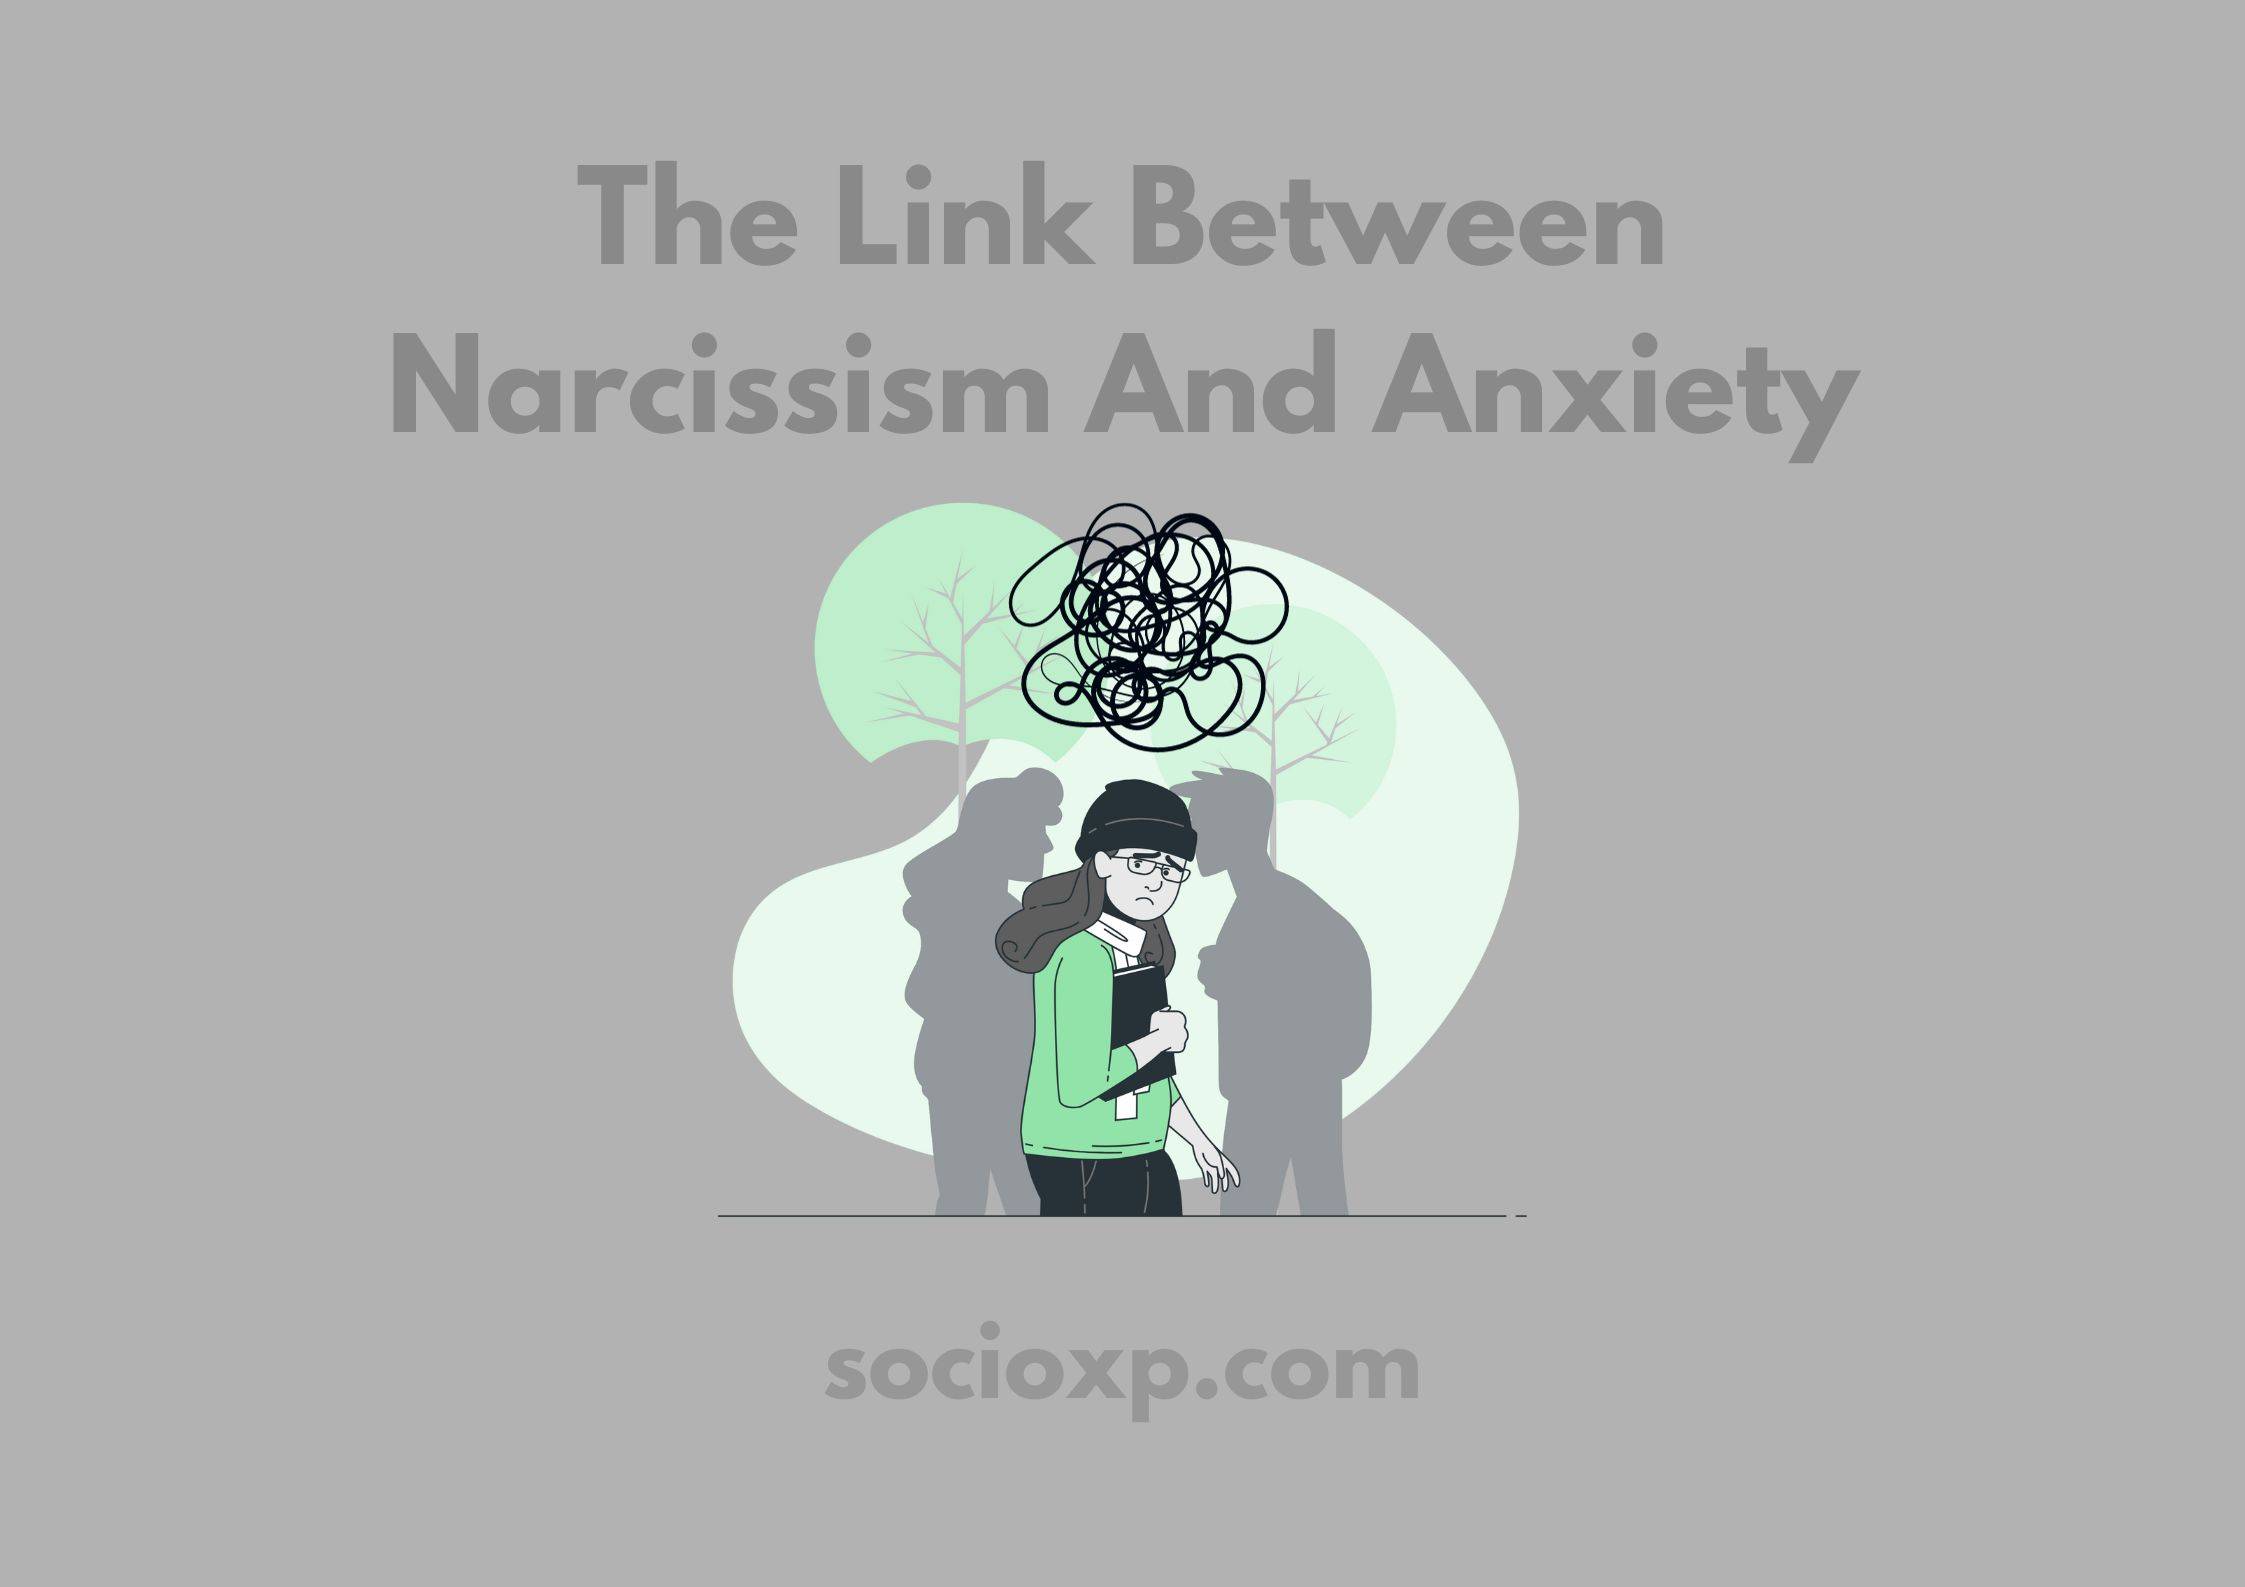 The Link Between Narcissism And Anxiety